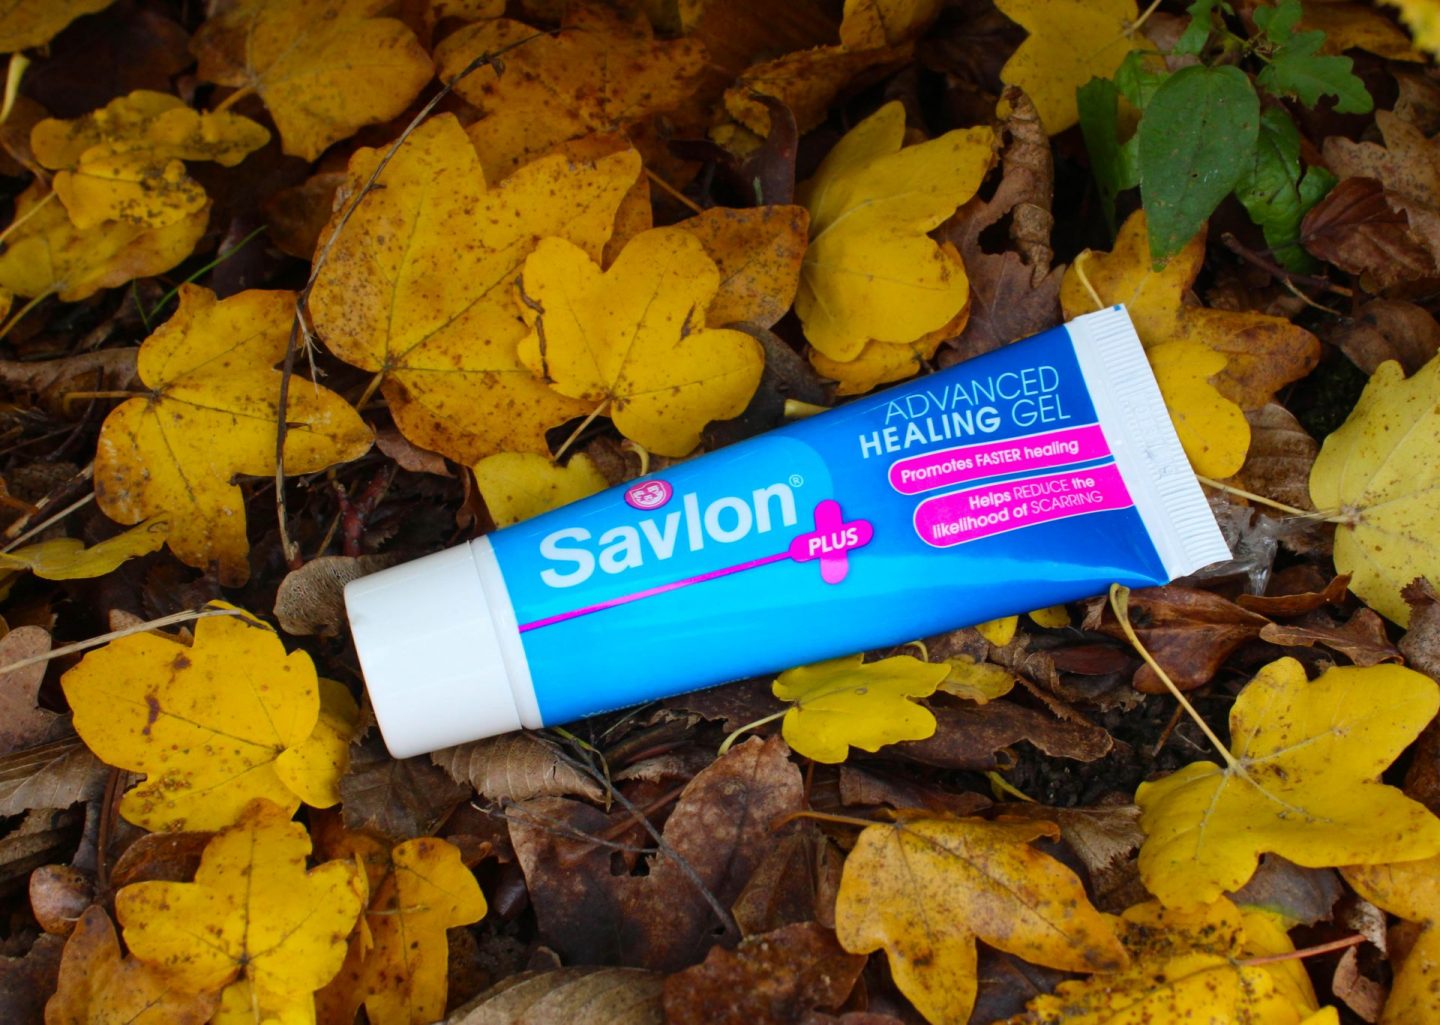 Savlon Advanced Healing Gel, Savlon, first aid kit, bumps and scrapes, playing outside with kids, outdoors, active kids